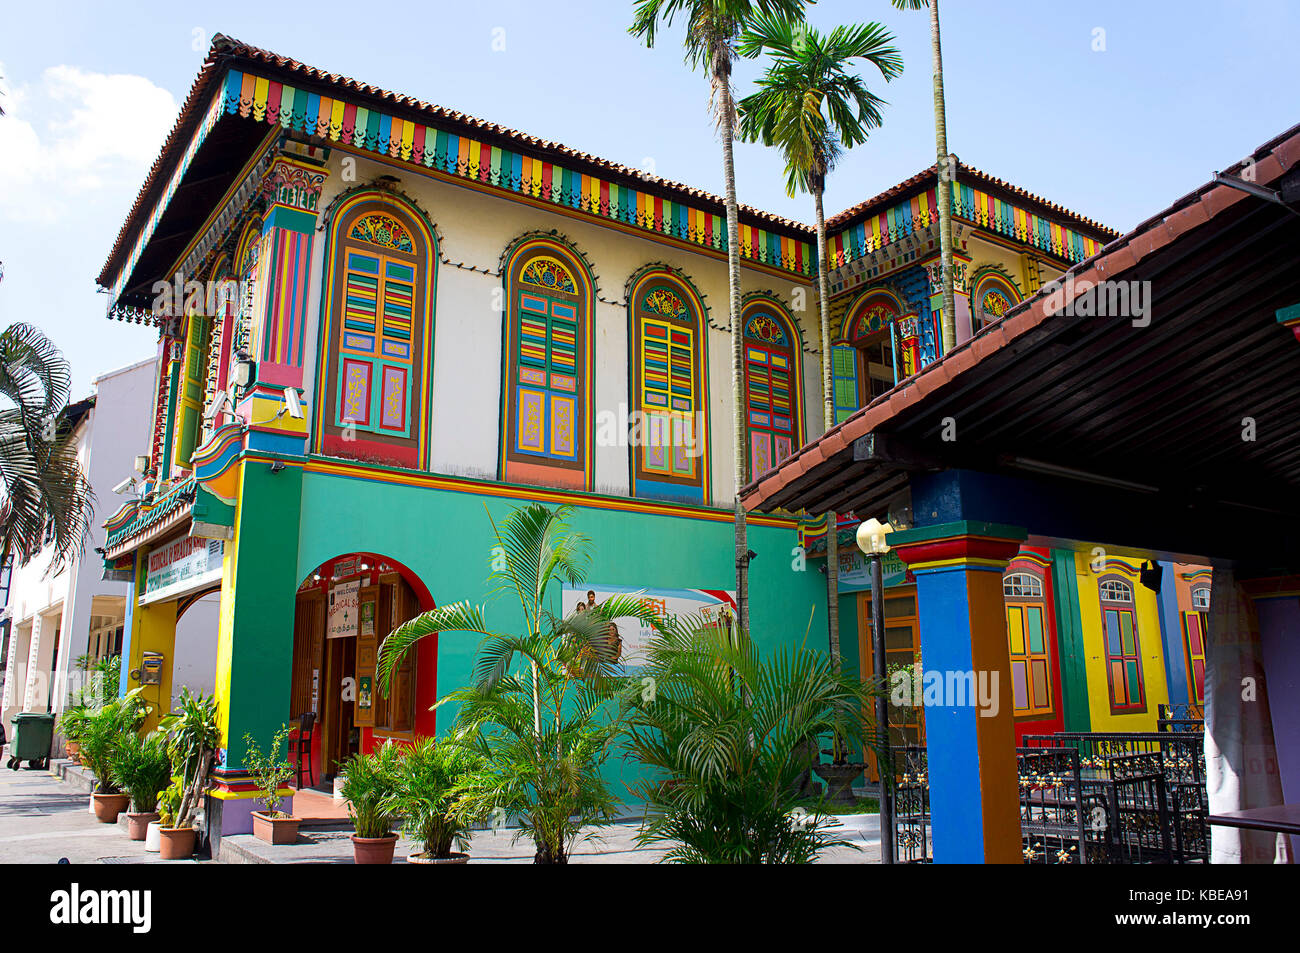 Colourful heritage building facade in Little India, centre of the city's large Indian community and one of its most vibrant districts. Singapore Stock Photo